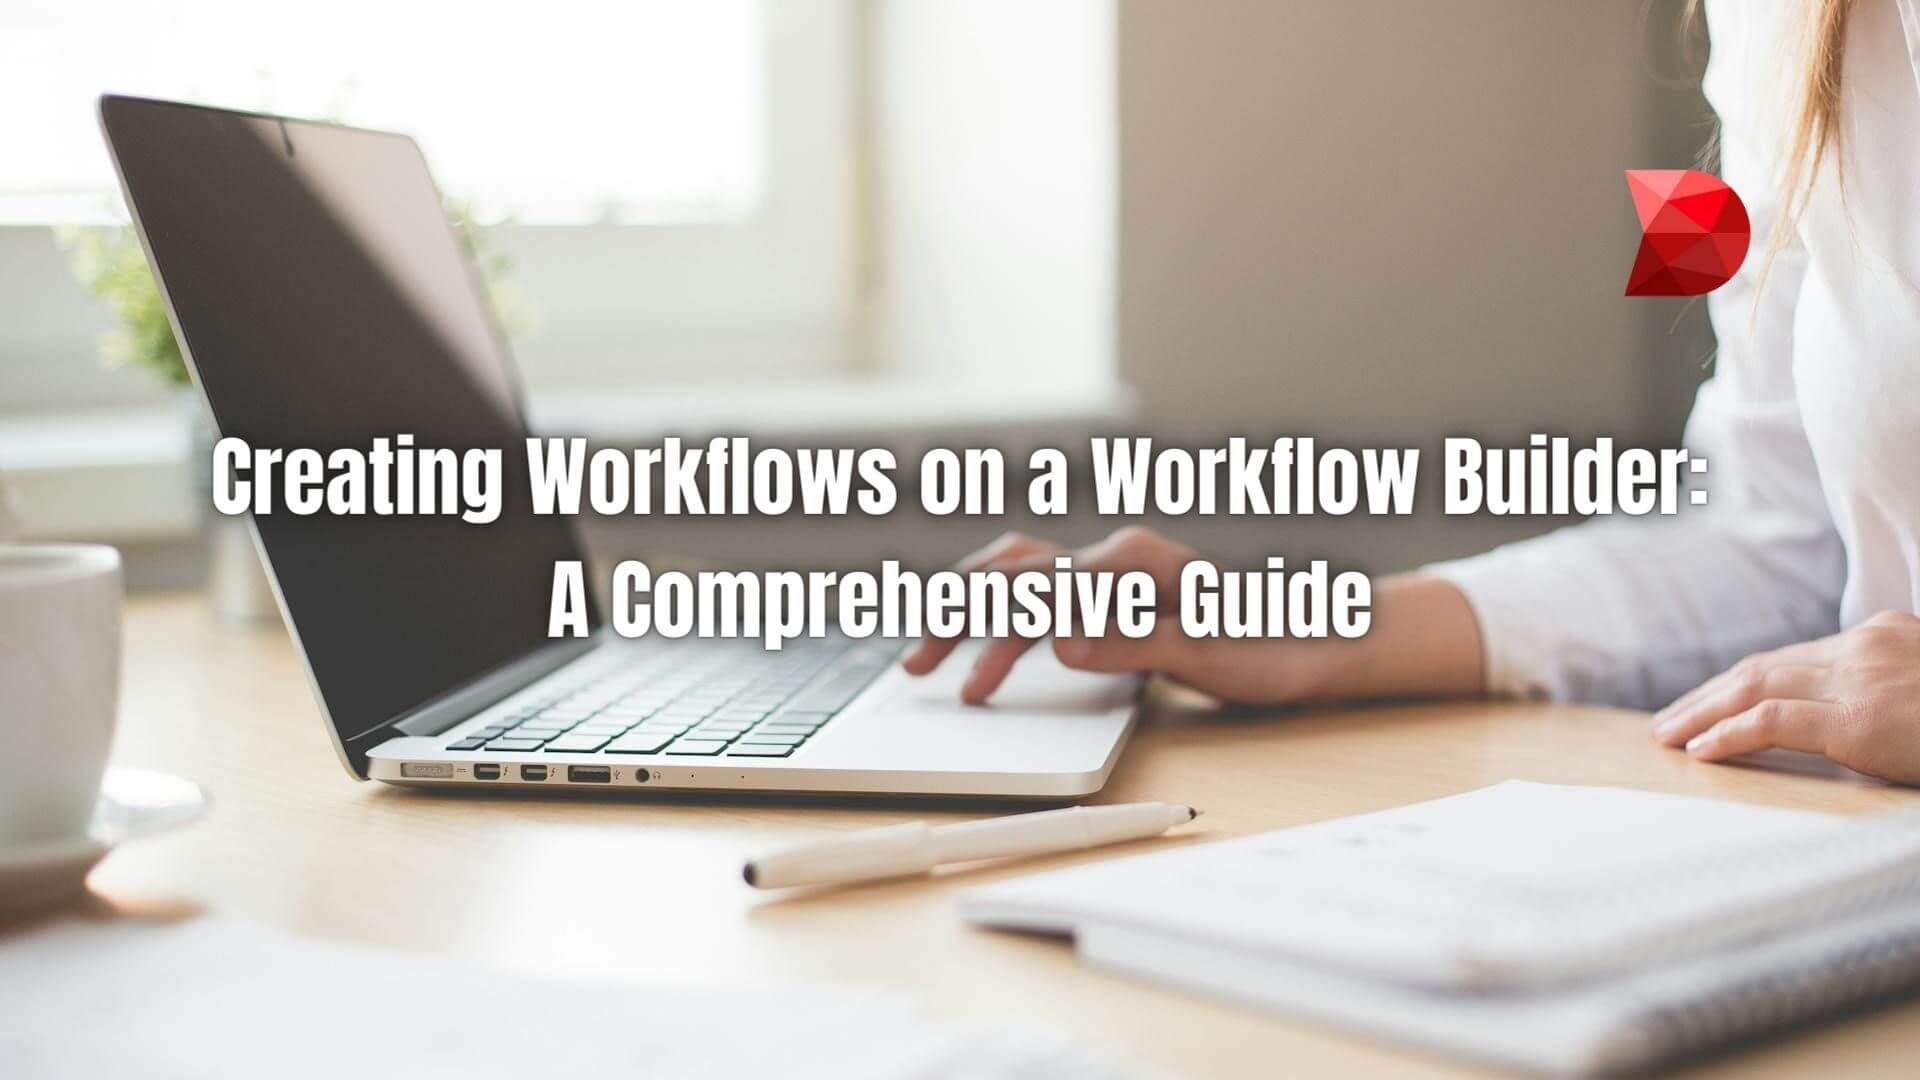 Unlock the power of efficient workflows! Learn step-by-step with our guide to creating workflows using a versatile workflow builder tool.